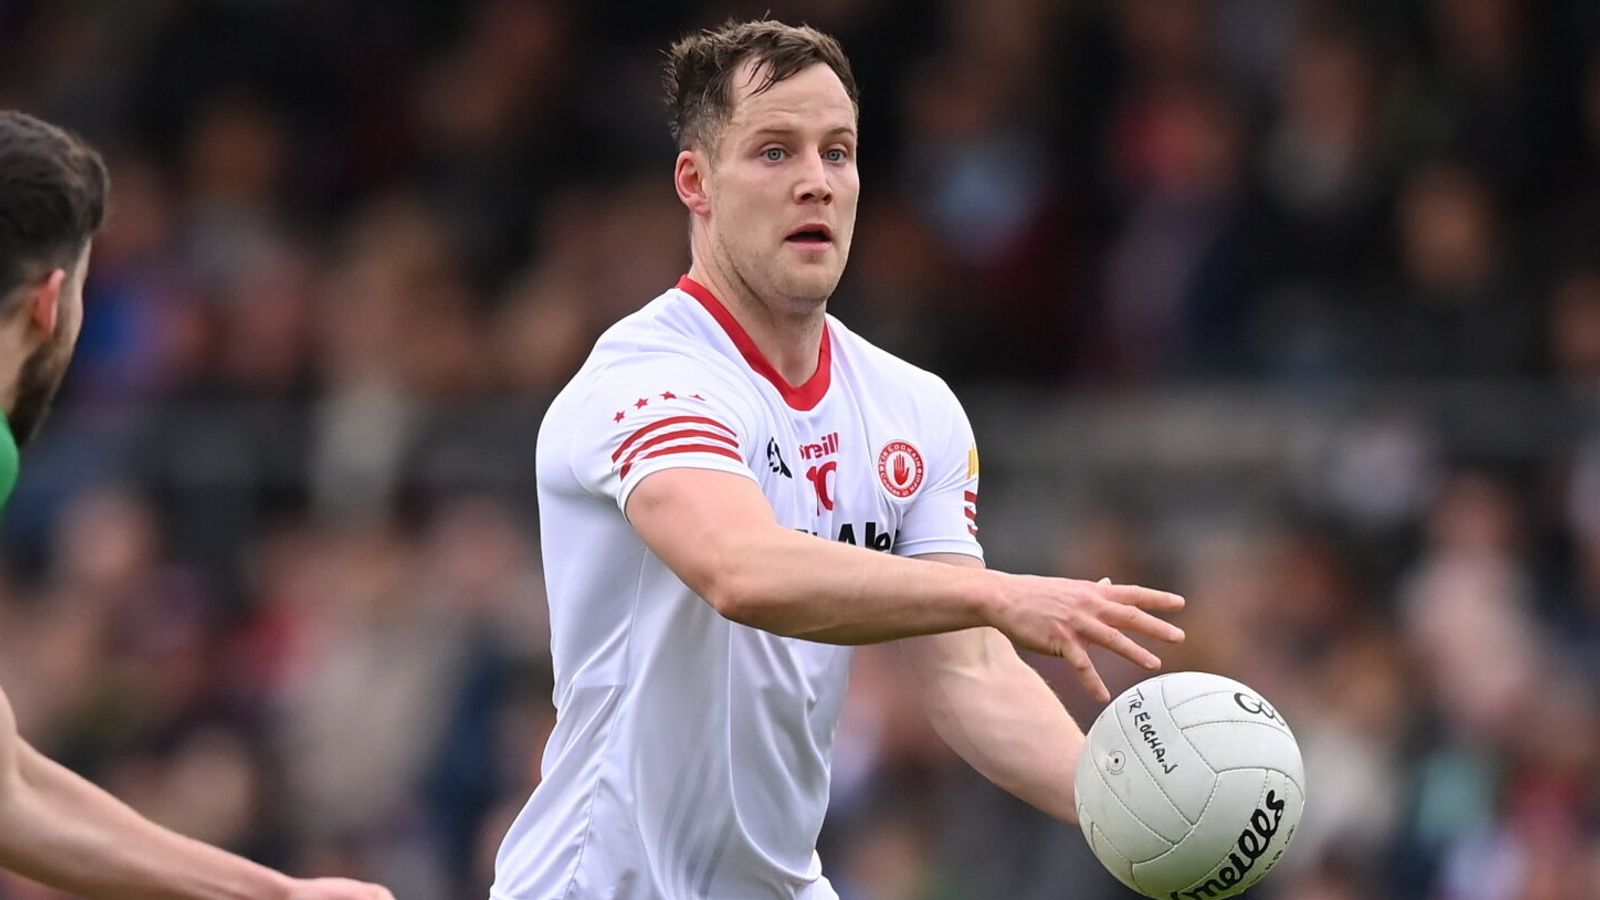 GAA Championships: Armagh vs Tyrone in the All-Ireland SFC qualifiers, Clare vs Limerick in the Munster SHC final LIVE!